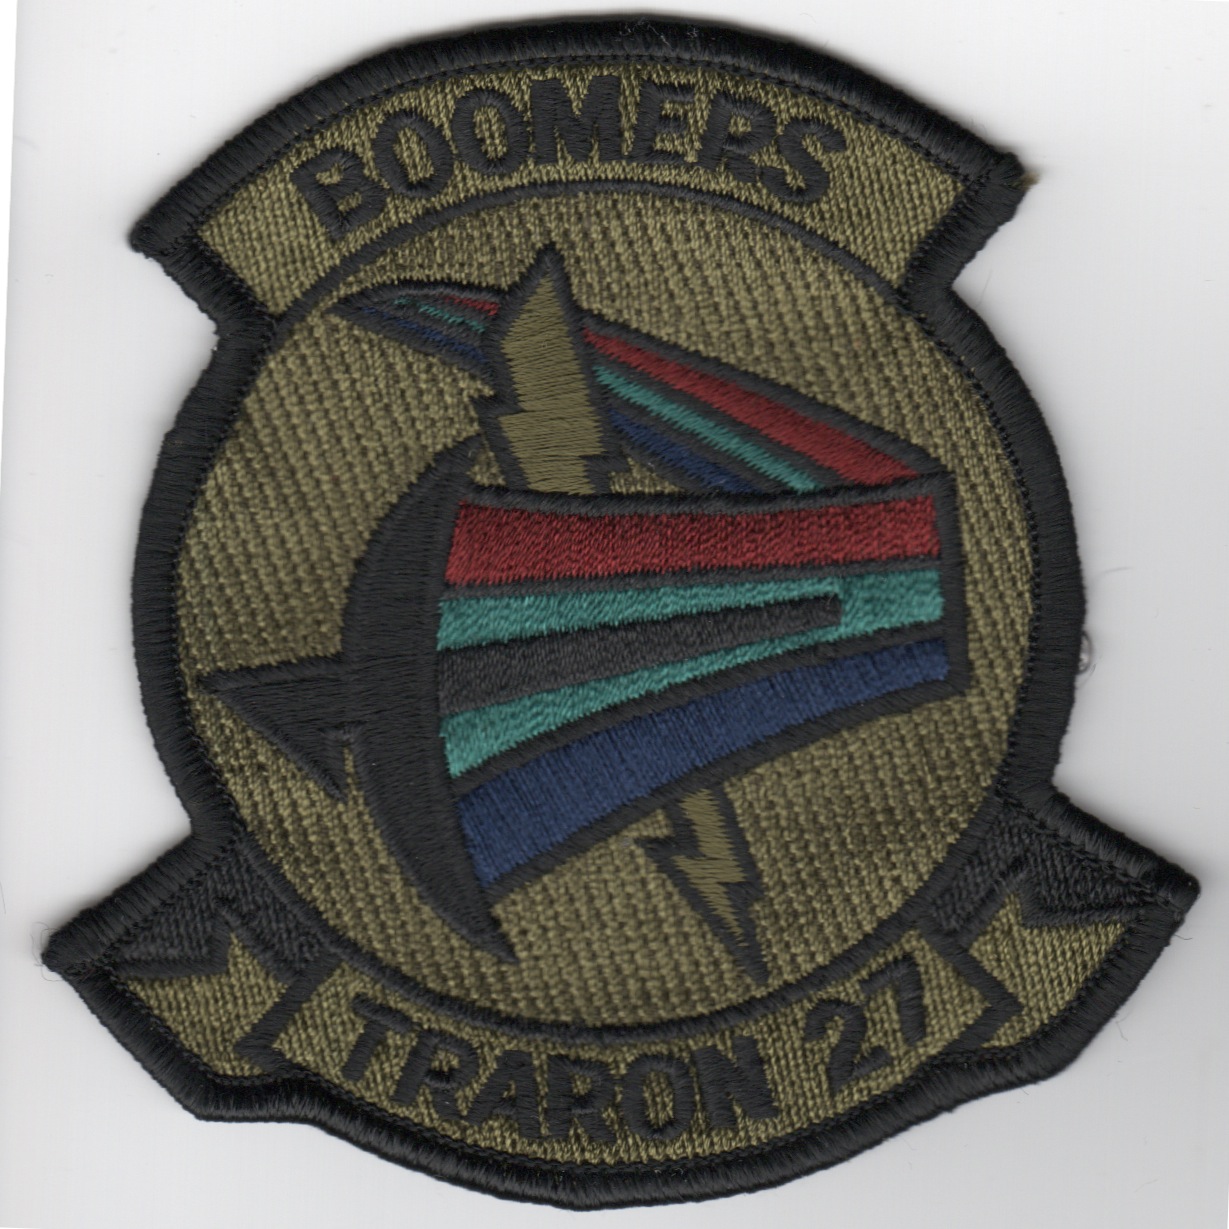 VT-27 'BOOMERS' Squadron Patch (Subd)